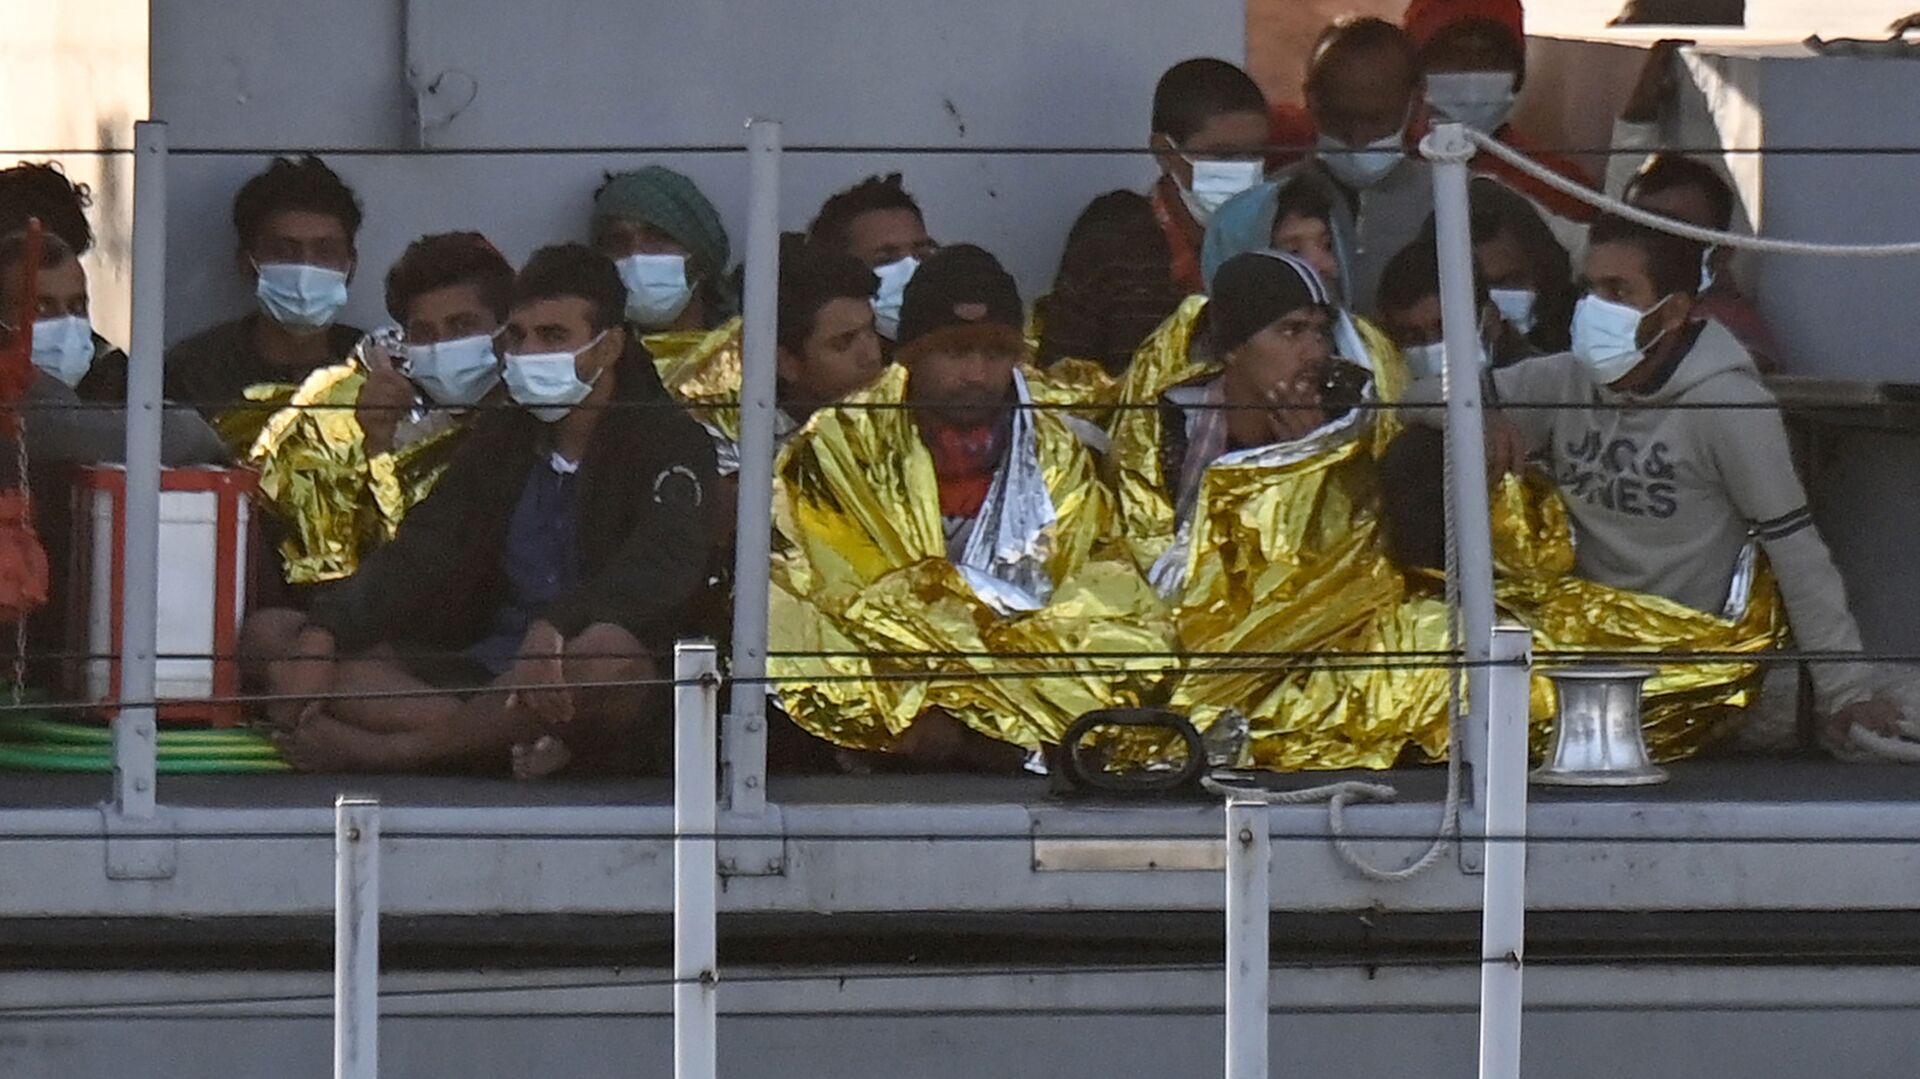 Migrants warmed by emergency blankets arrive on a boat of the Italian Guardia Di Finanza law enforcement agency on May 17, 2021 to disembark on the southern Italian Pelagie Island of Lampedusa. - More than 1,400 migrants arrived on the Italian island of Lampedusa at the weekend, sparking calls from far-right politicians for action to stem the flow, amid fresh moves by Italian authorities against the rescue boats who operate in the central Mediterranean. - Sputnik International, 1920, 14.09.2023